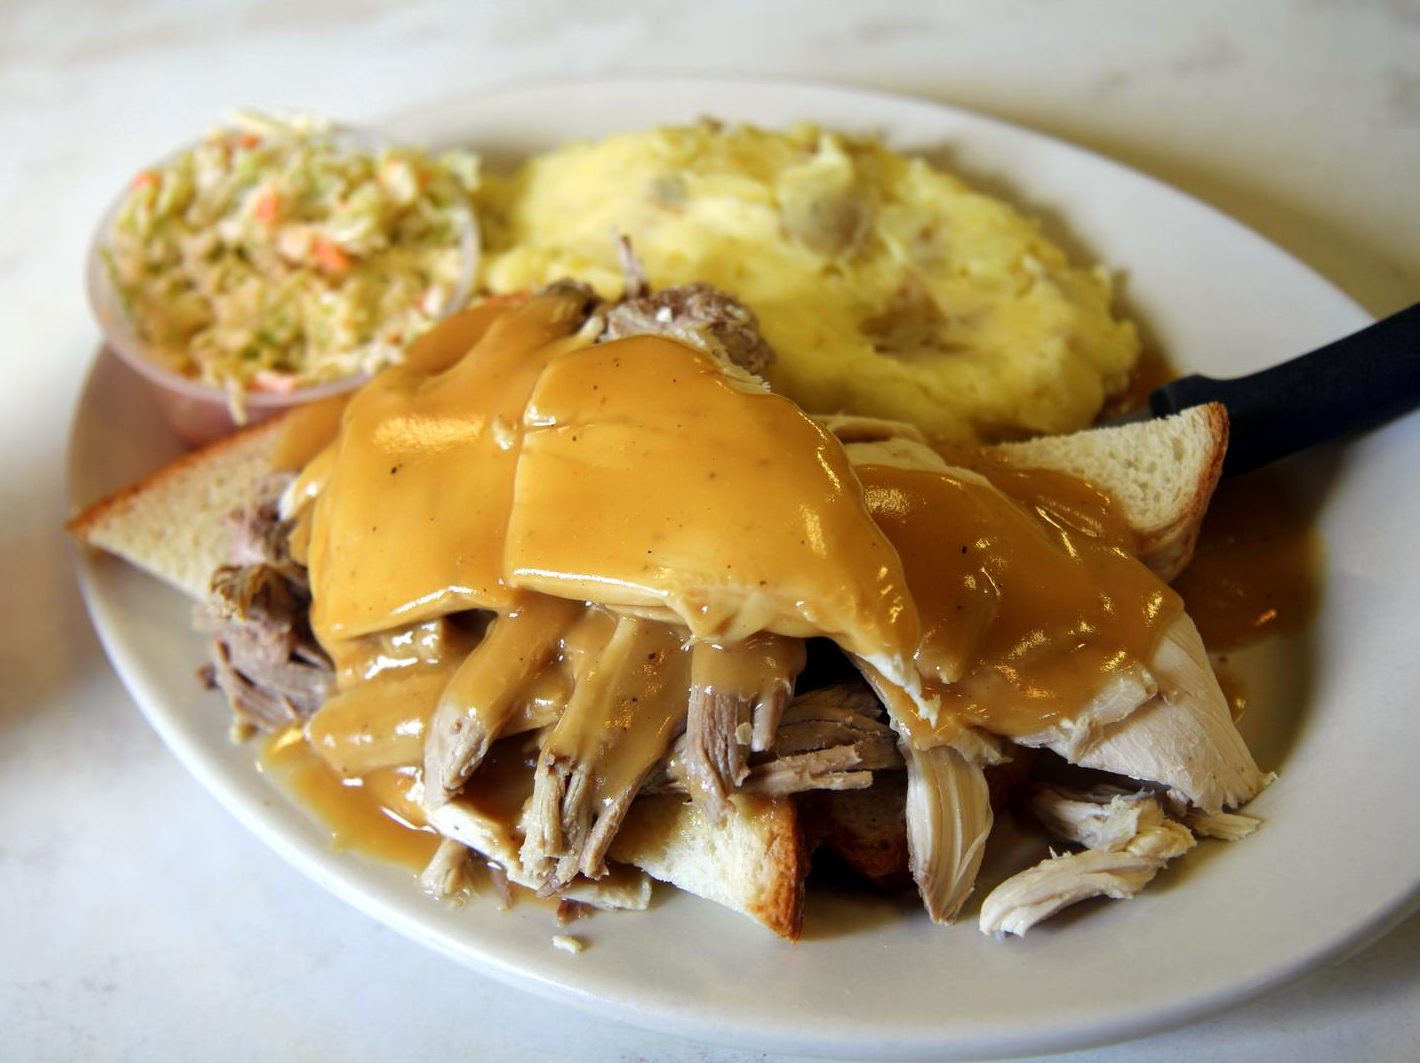 Gravy spills across a pile of just-carved turkey in an open-face fandwich, with sides of mashed potatoes and cole slaw.